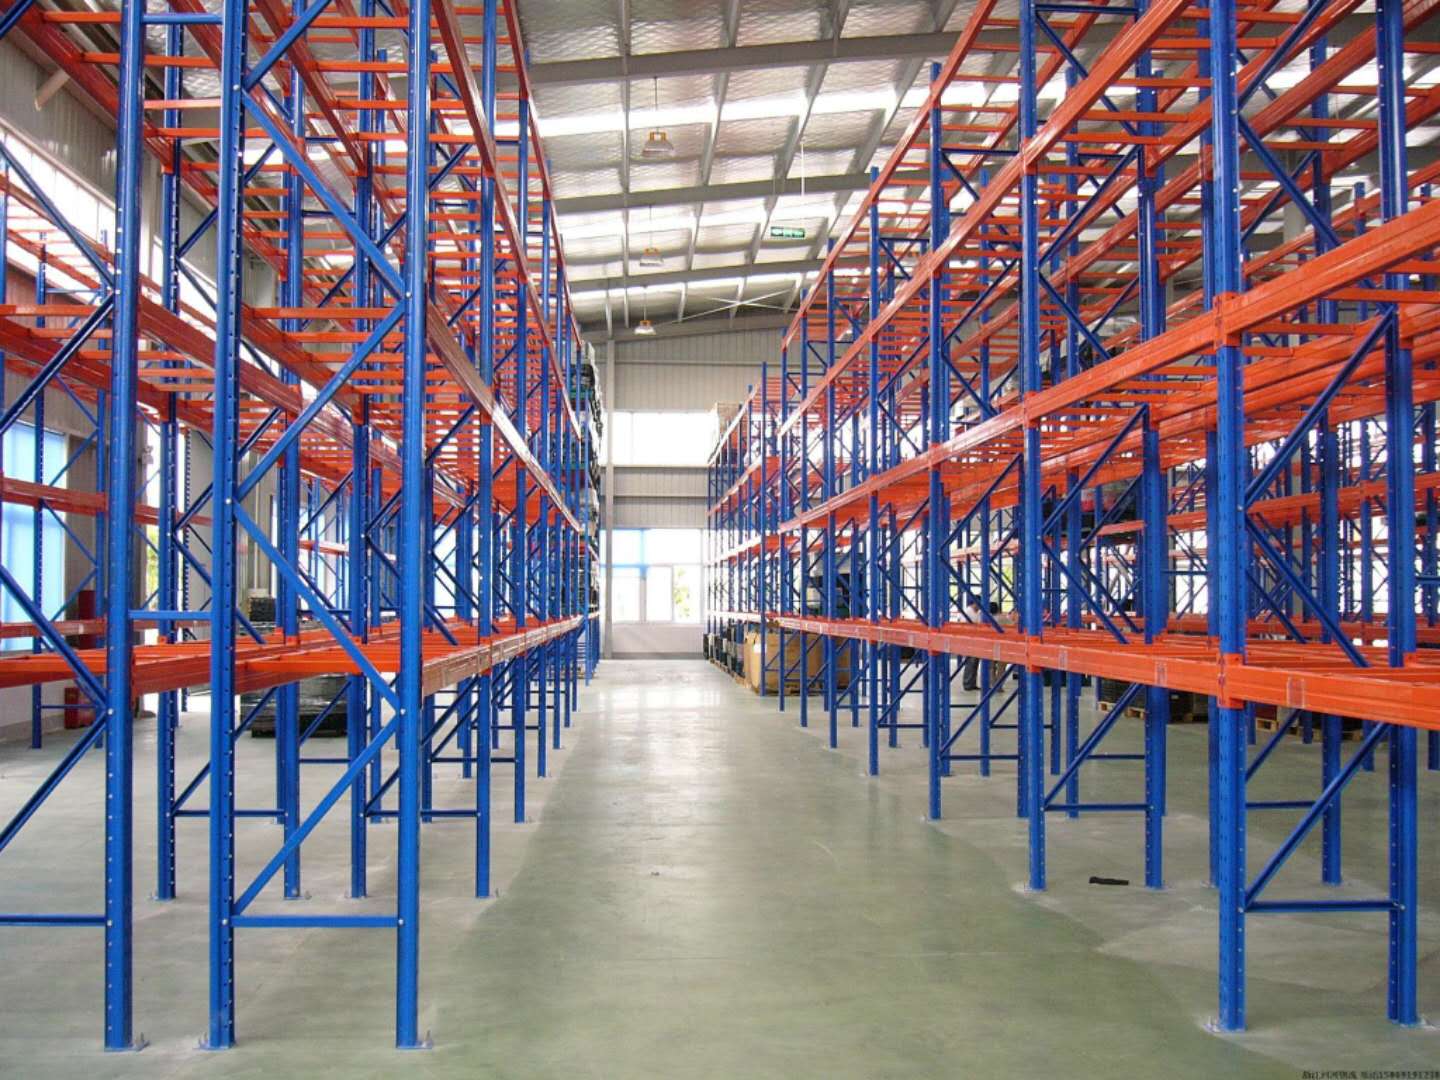 Heavy duty shelves, large storage space, super strong load-bearing surface, electrostatic spraying, and on-site measurement by the manufacturer